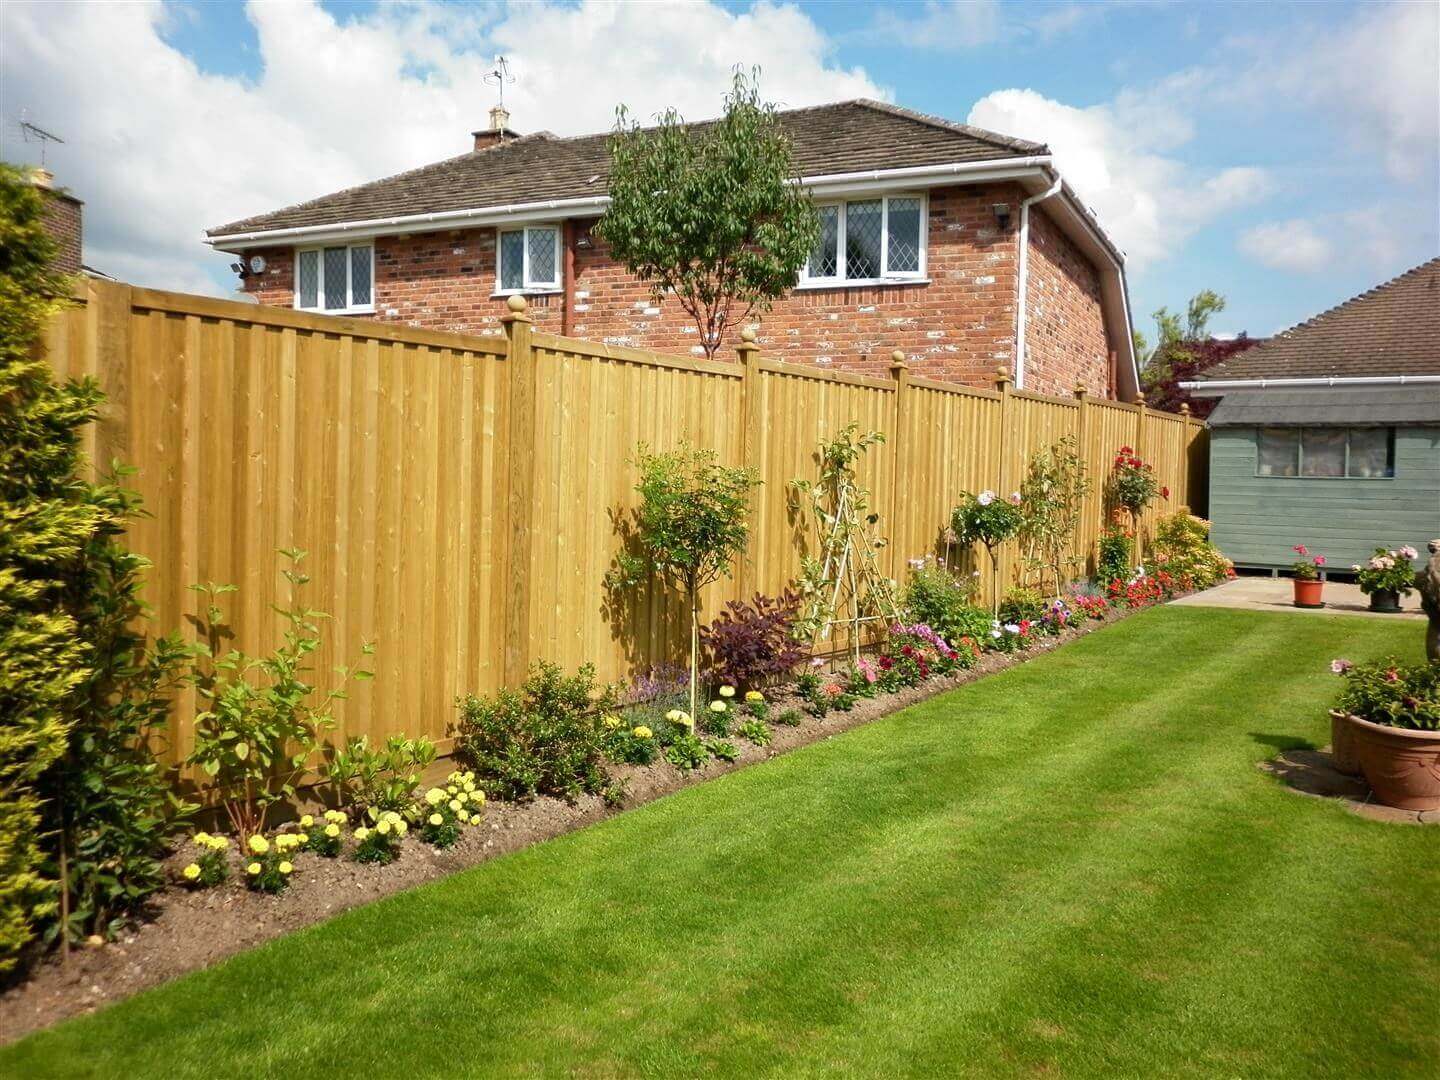 New Fence panels with flowers